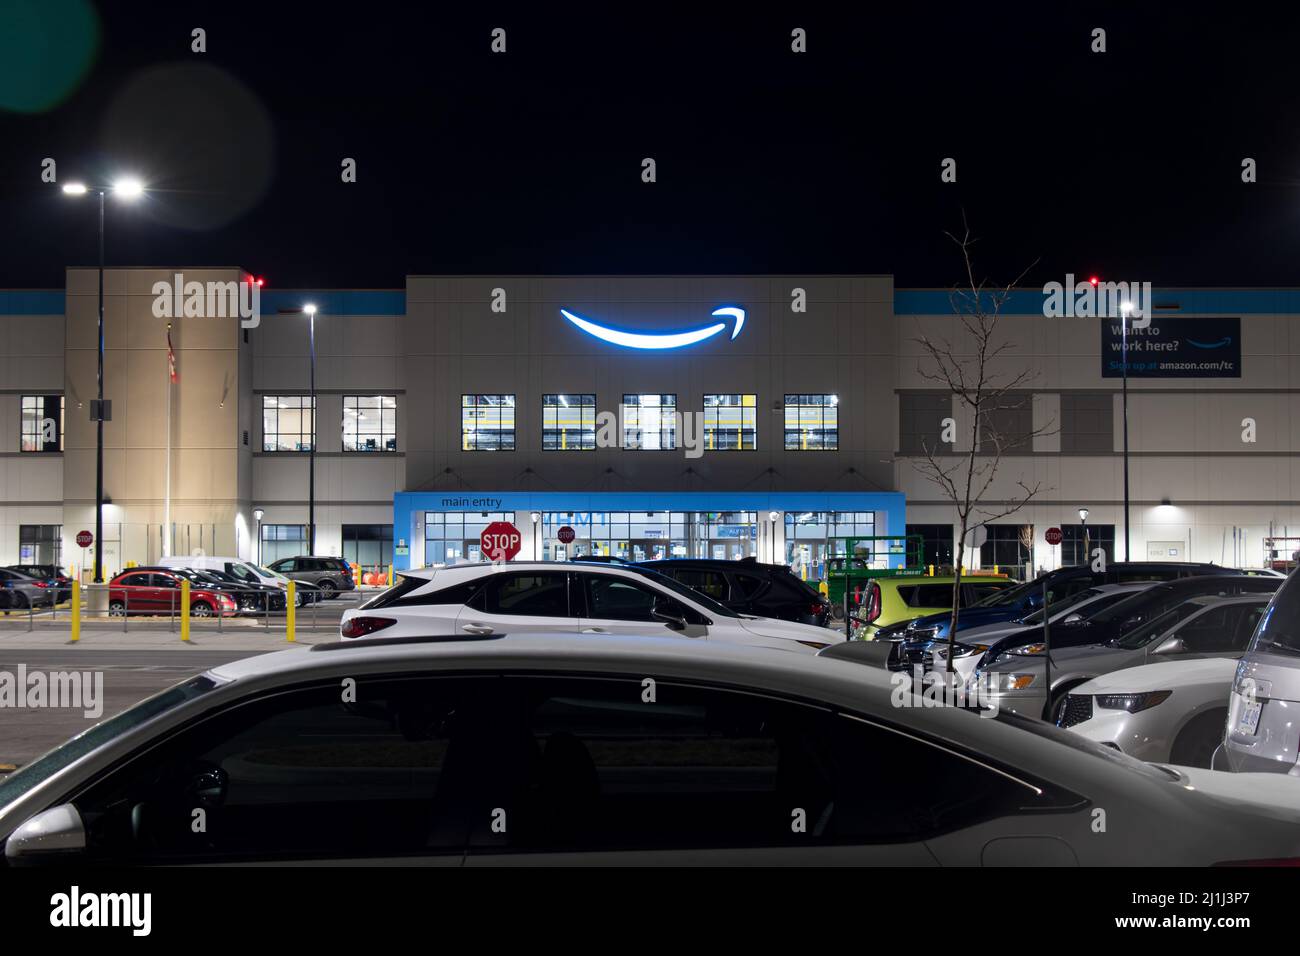 The Amazon logo shines brightly in blue at the top of the front entrance to a large, new fulfillment center near an airport. Stock Photo